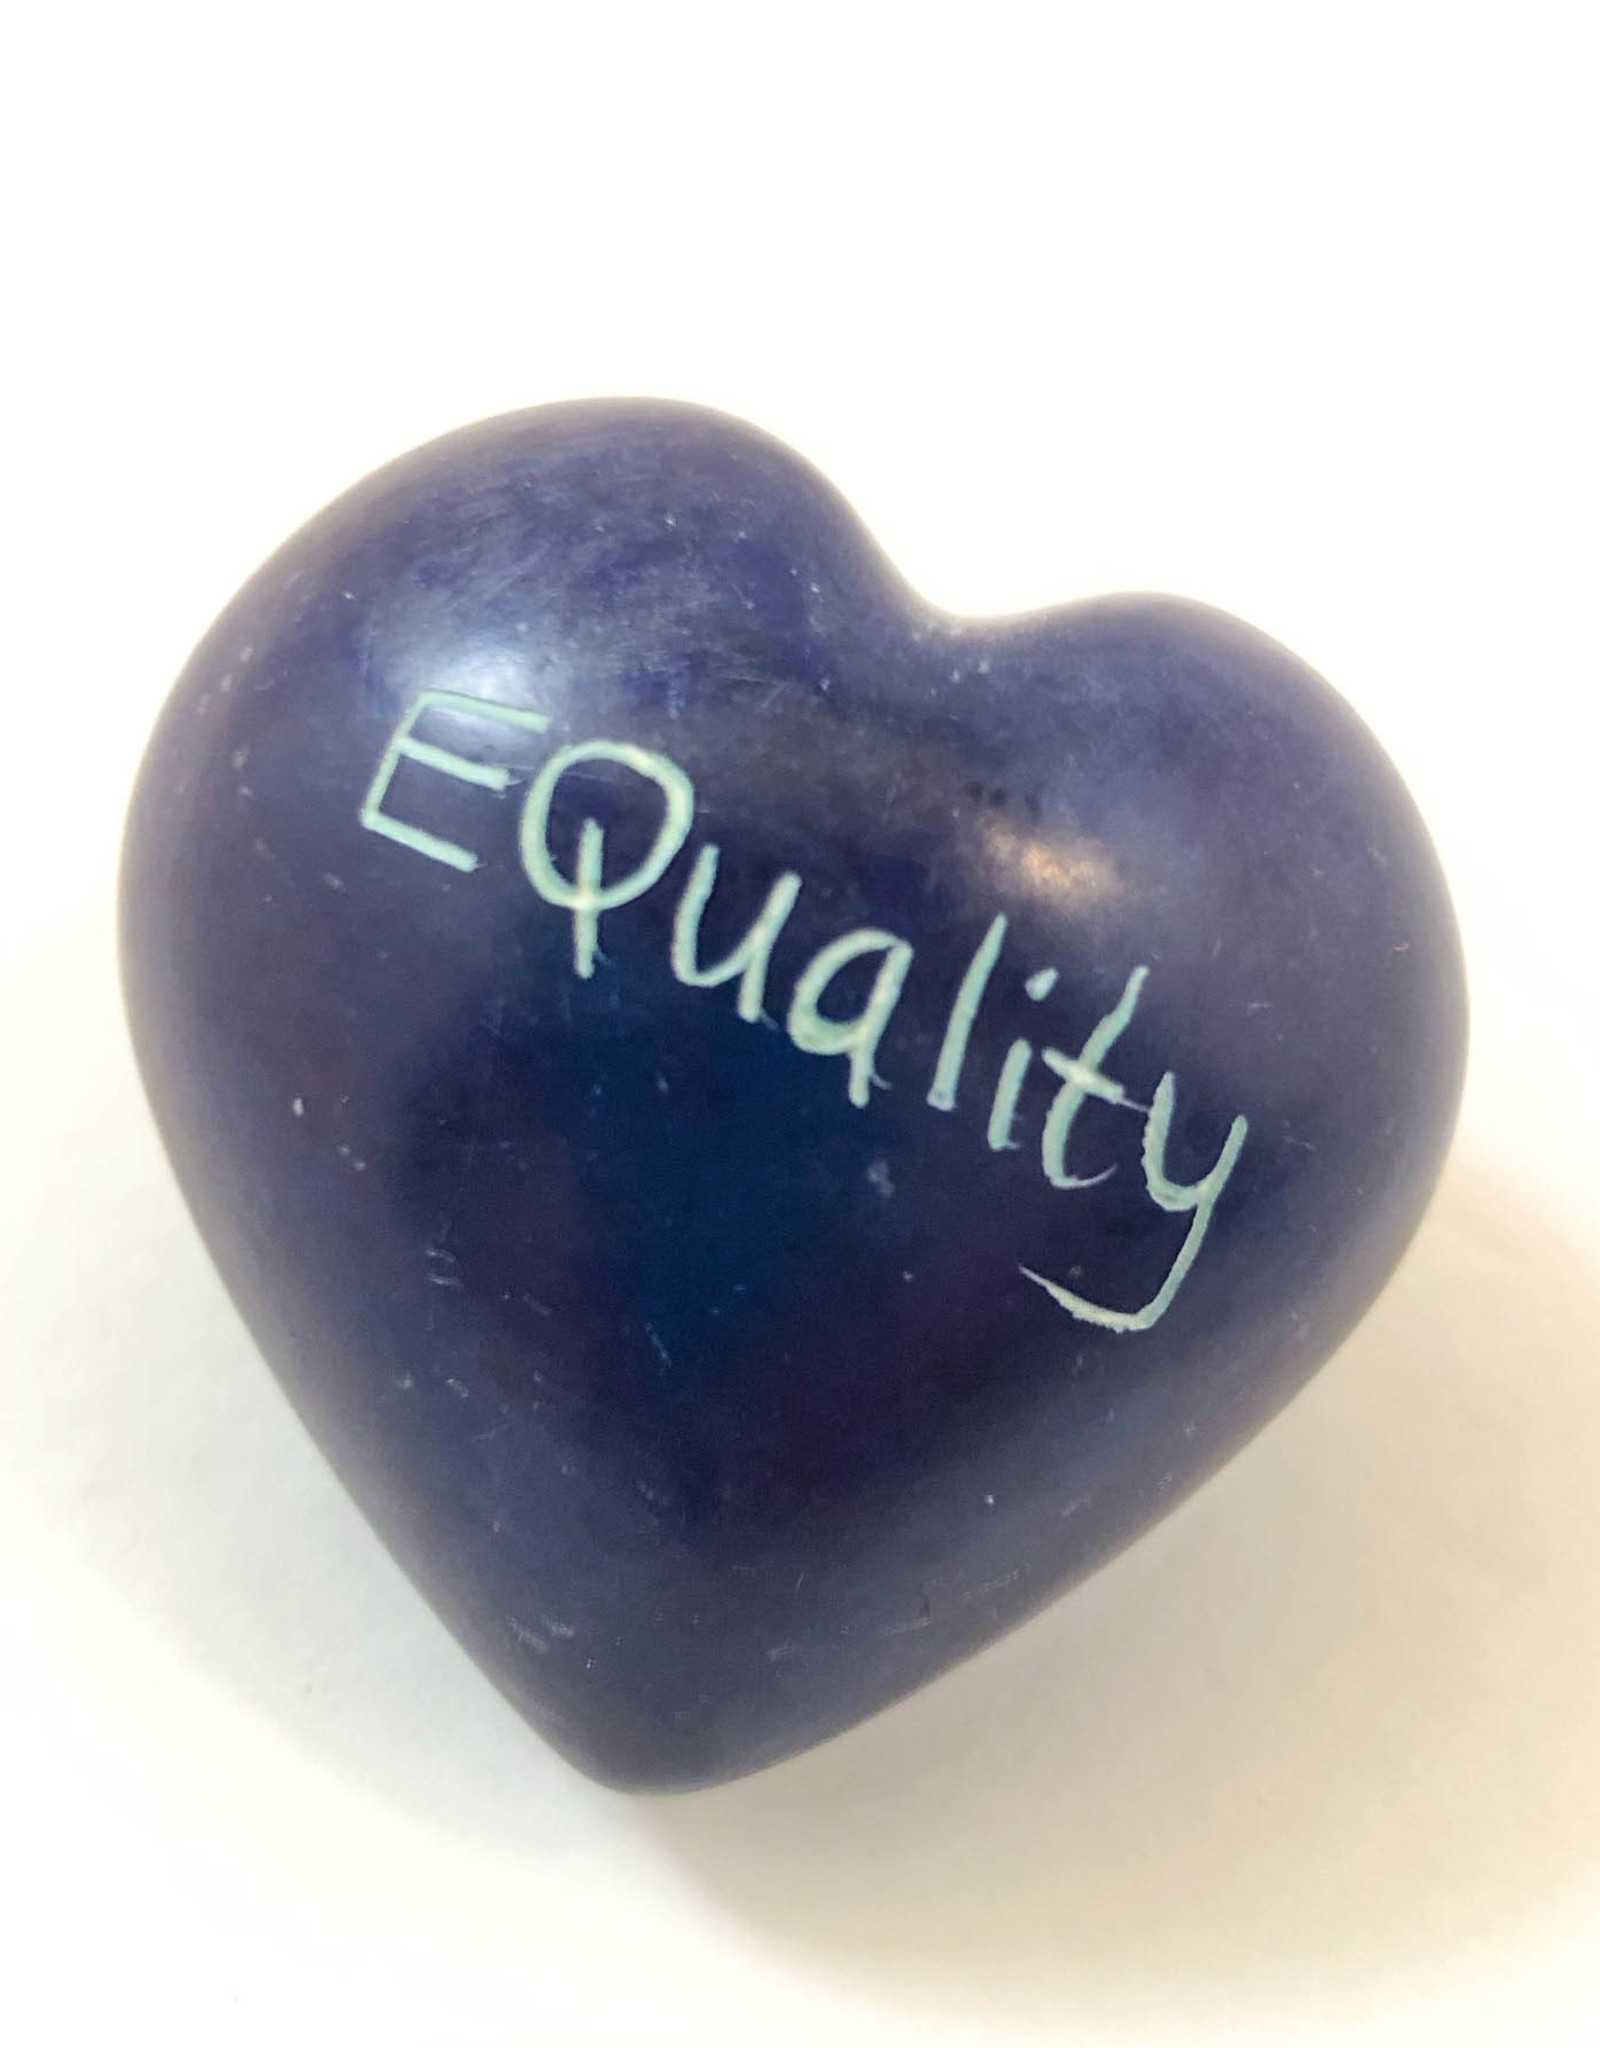 Venture Imports Word Hearts - Equality, Blue